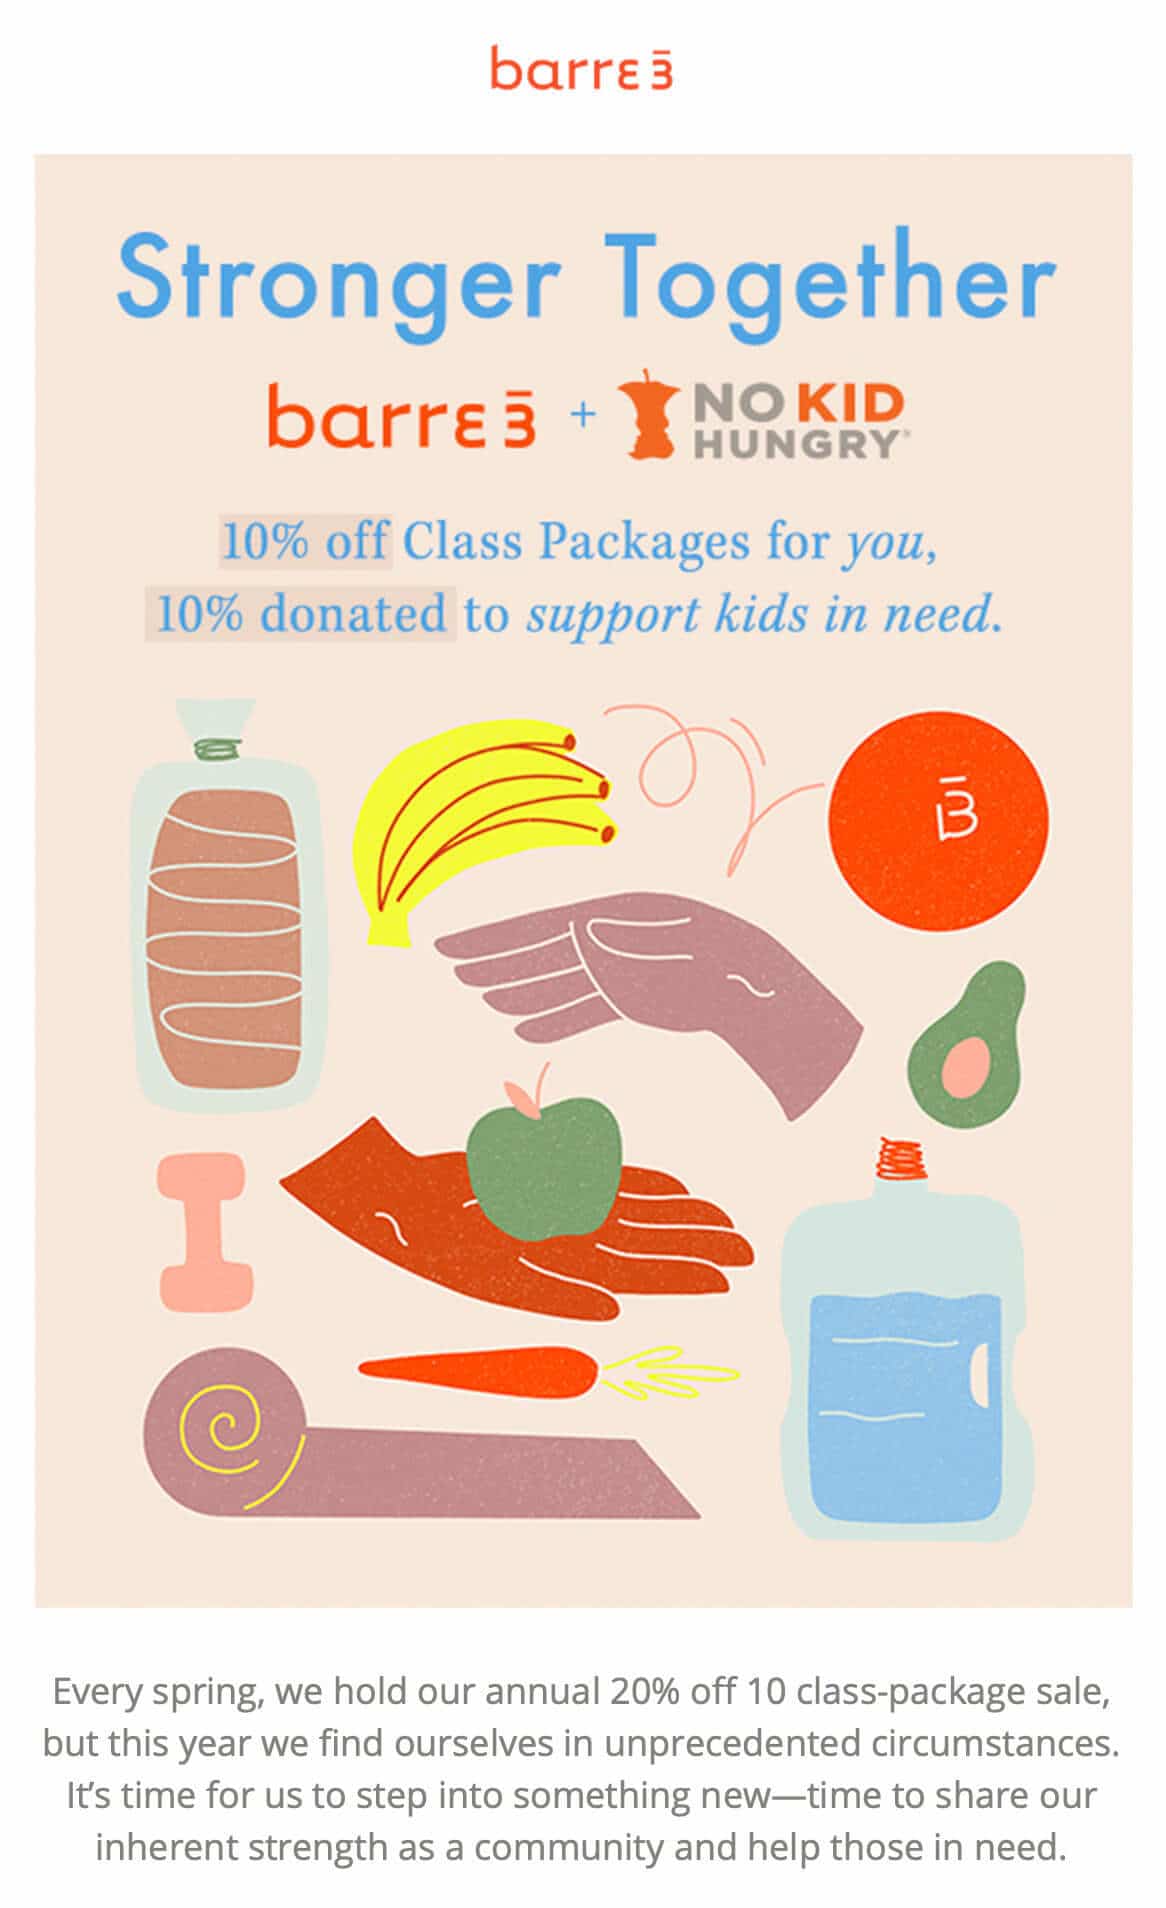 barre3 commits to helping those in need during the crisis, even while doors are closed